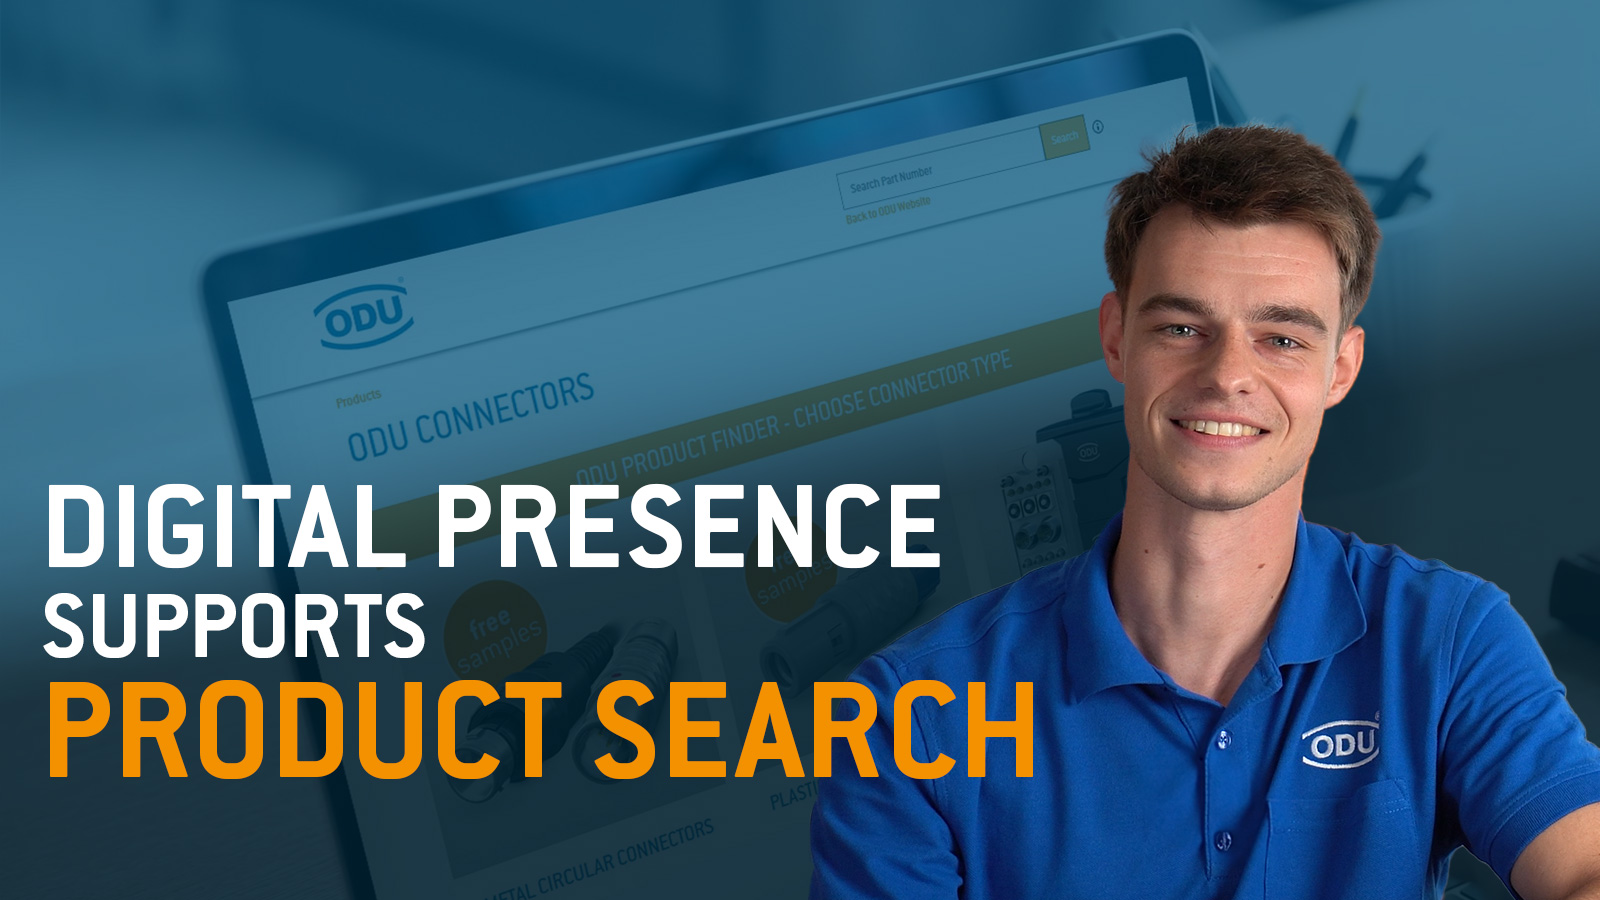 New Video Digital presence supports product search